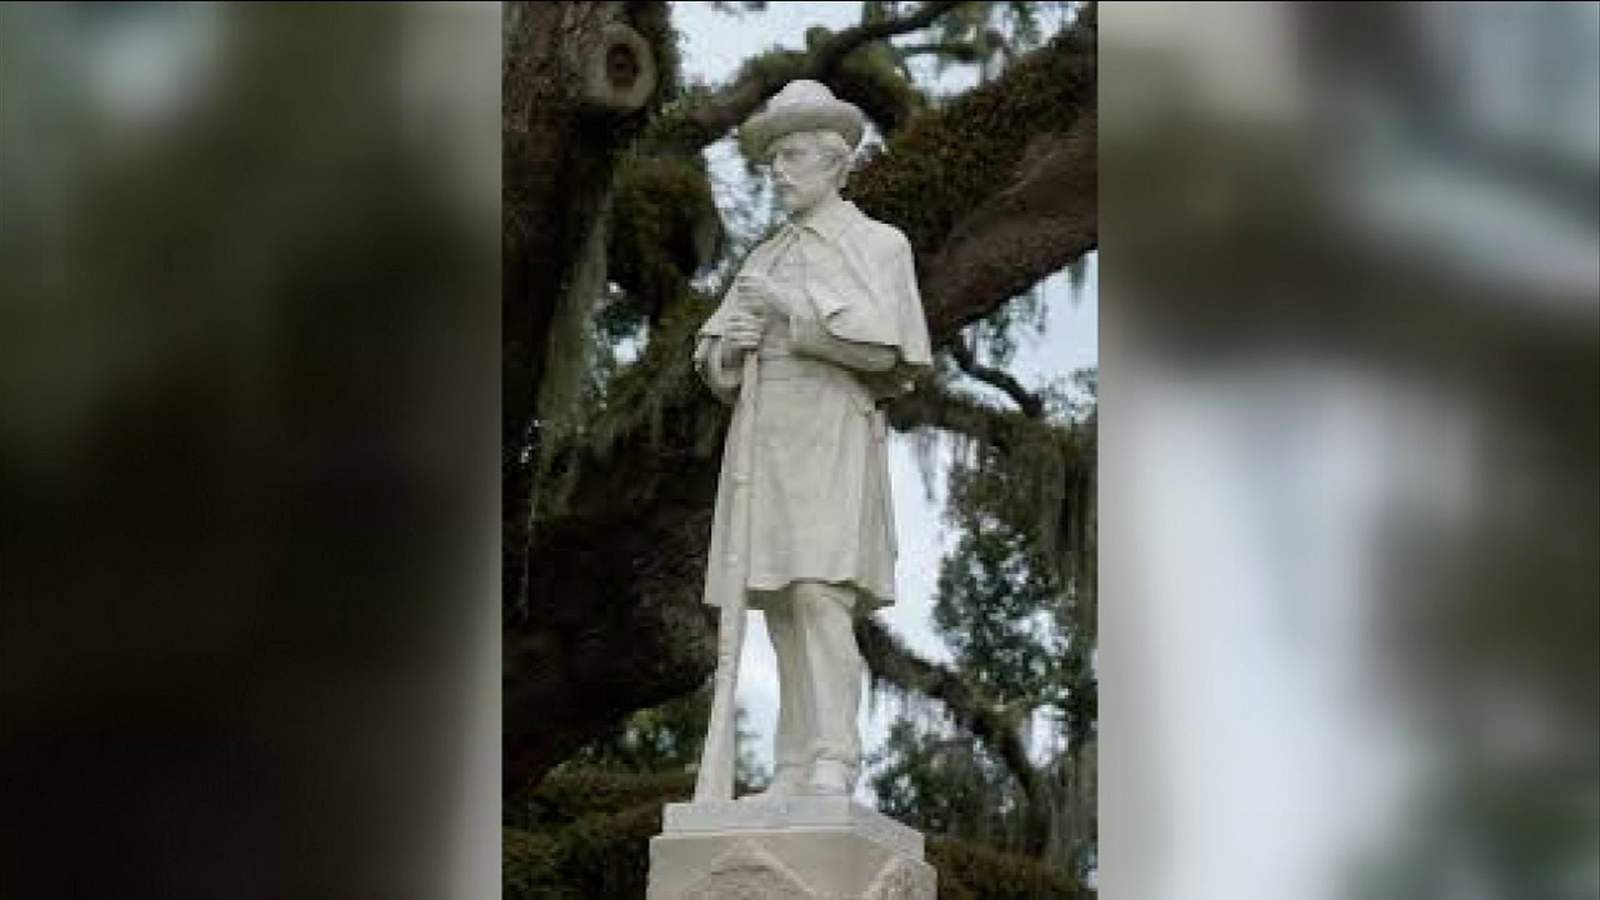 Brunswick to remove Confederate monument from park